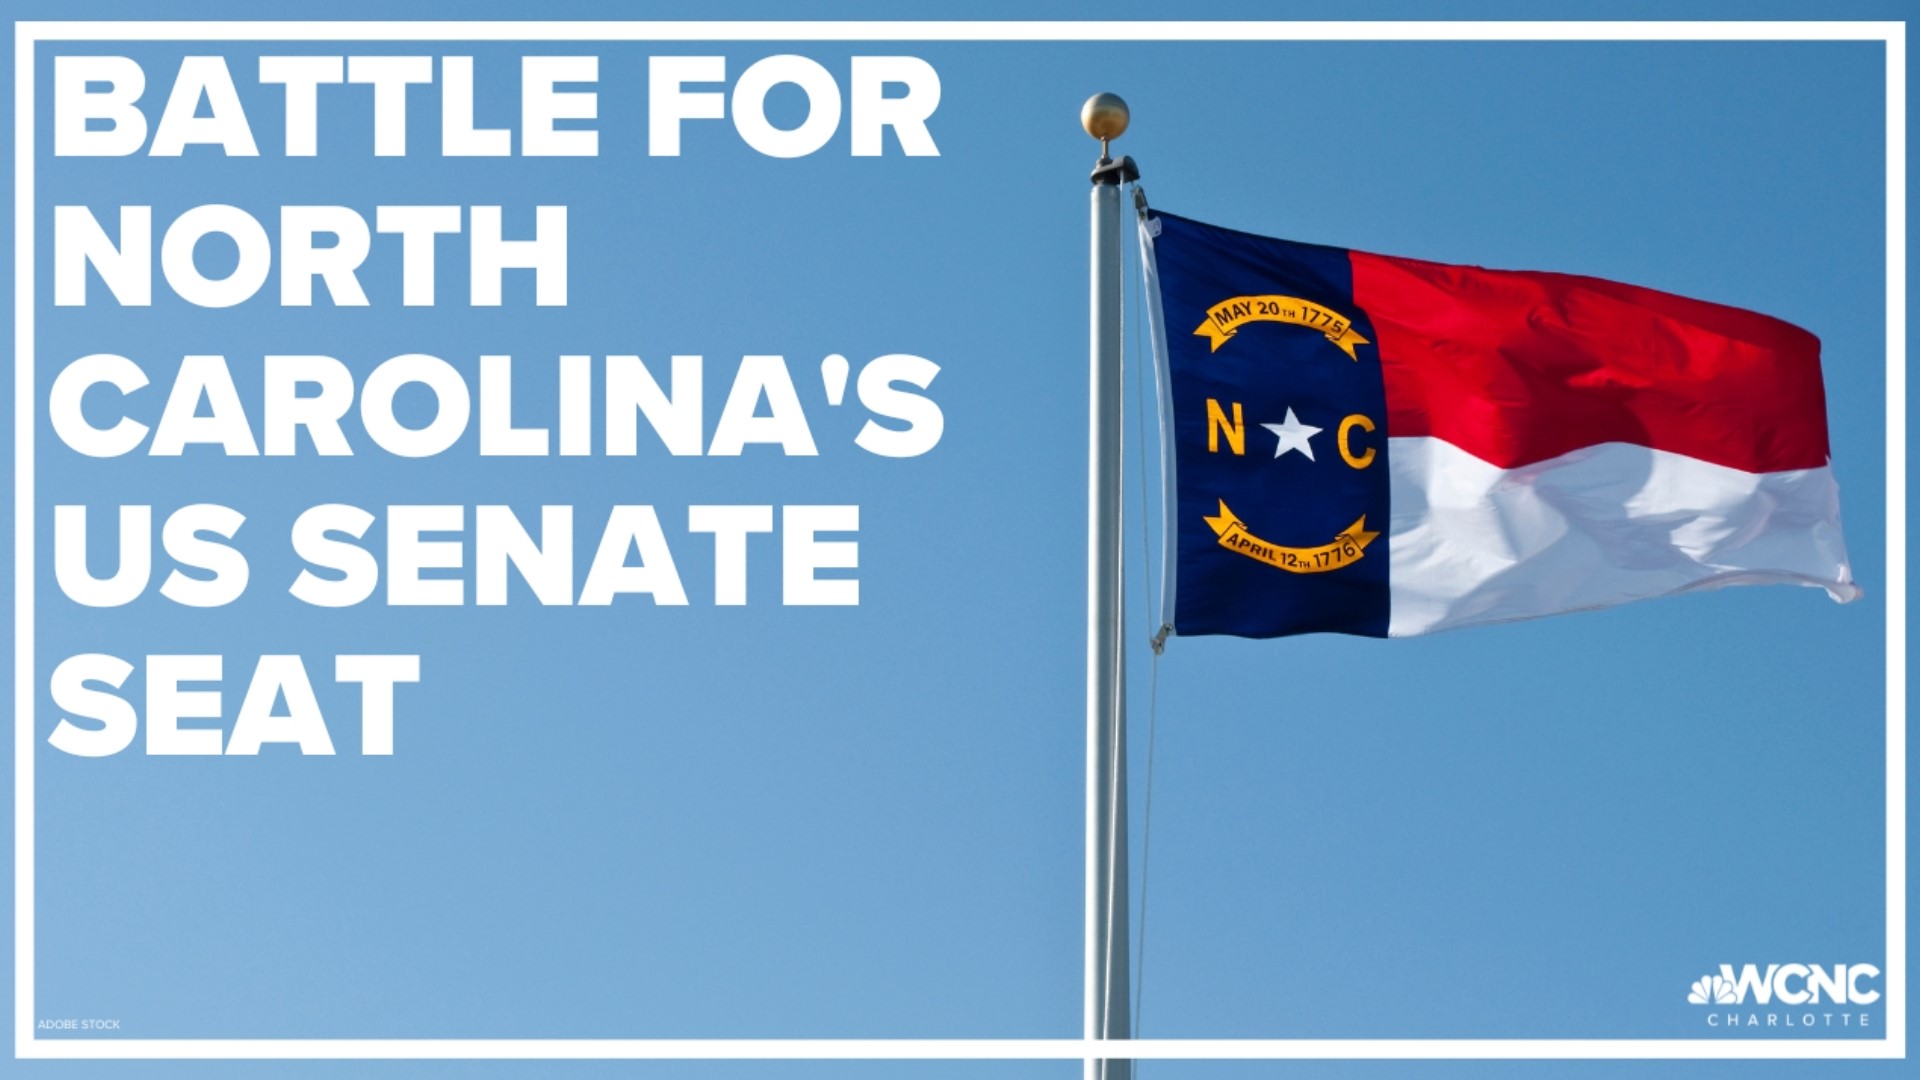 Democrats are launching a new attack ad in the battle for North Carolina's US Senate seat.